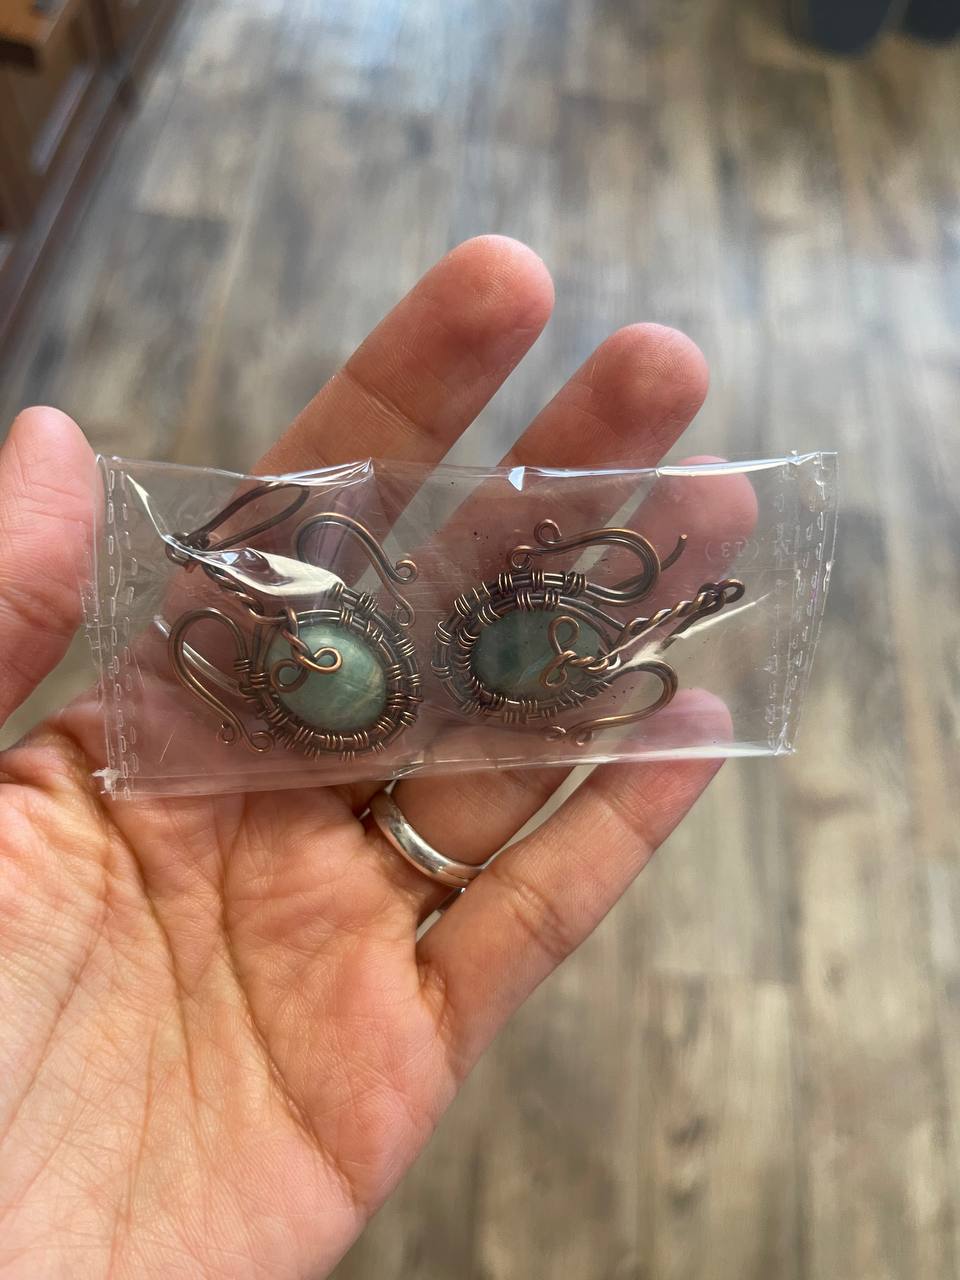 @Connectcocrystals Earrings